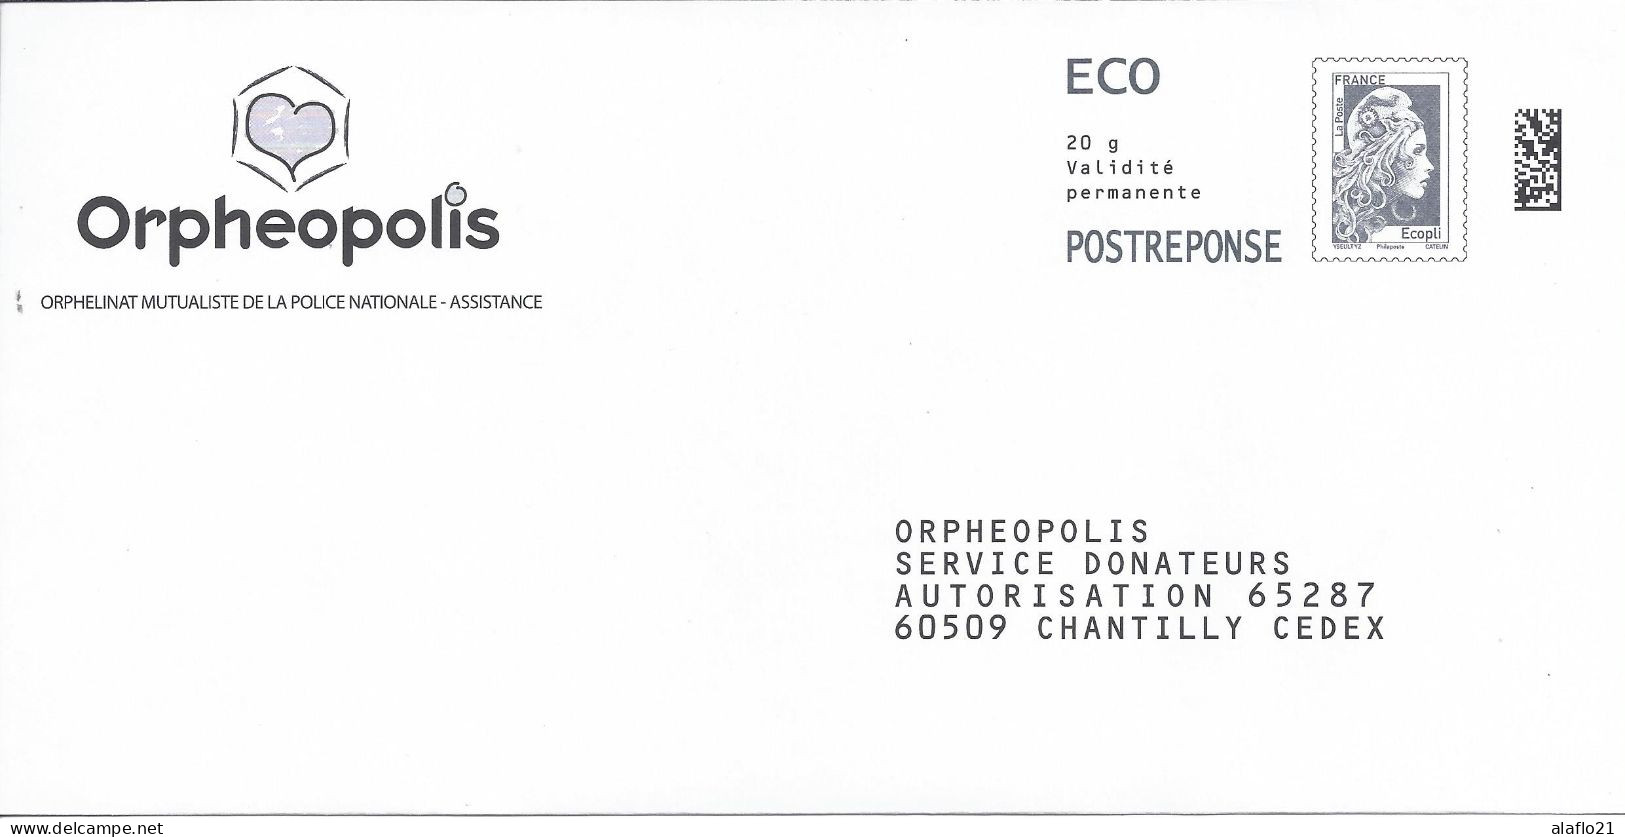 POSTREPONSE ECO - MARIANNE D'YZ - ORPHEOPOLIS - Lot 355516 - PAP: Antwoord